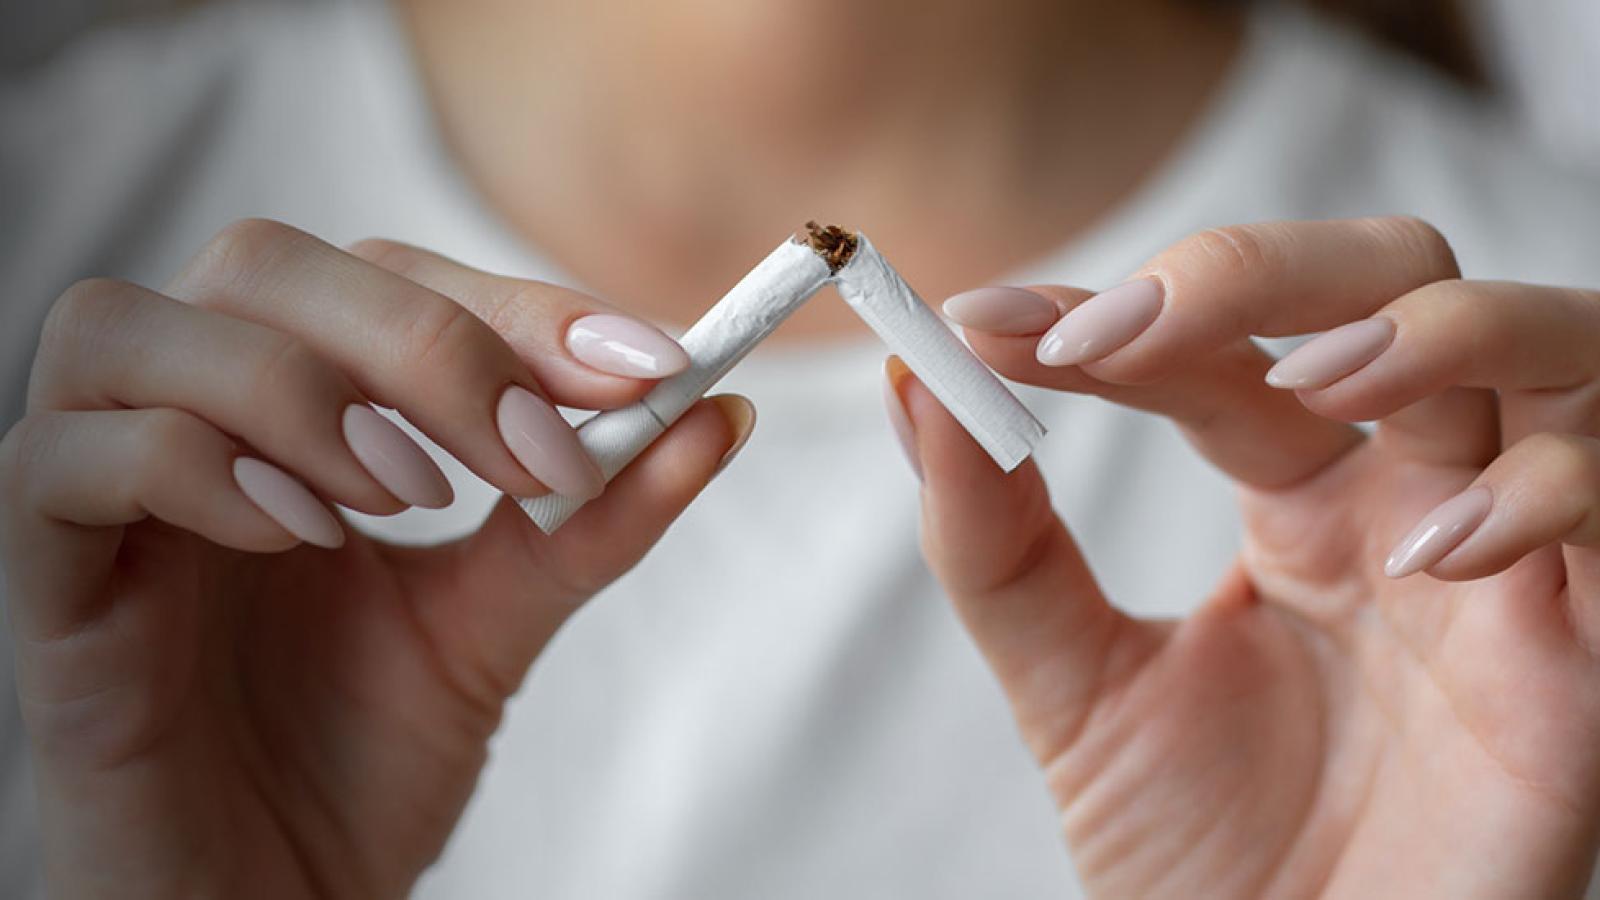 Smoking Cessation Support to Help You Quit